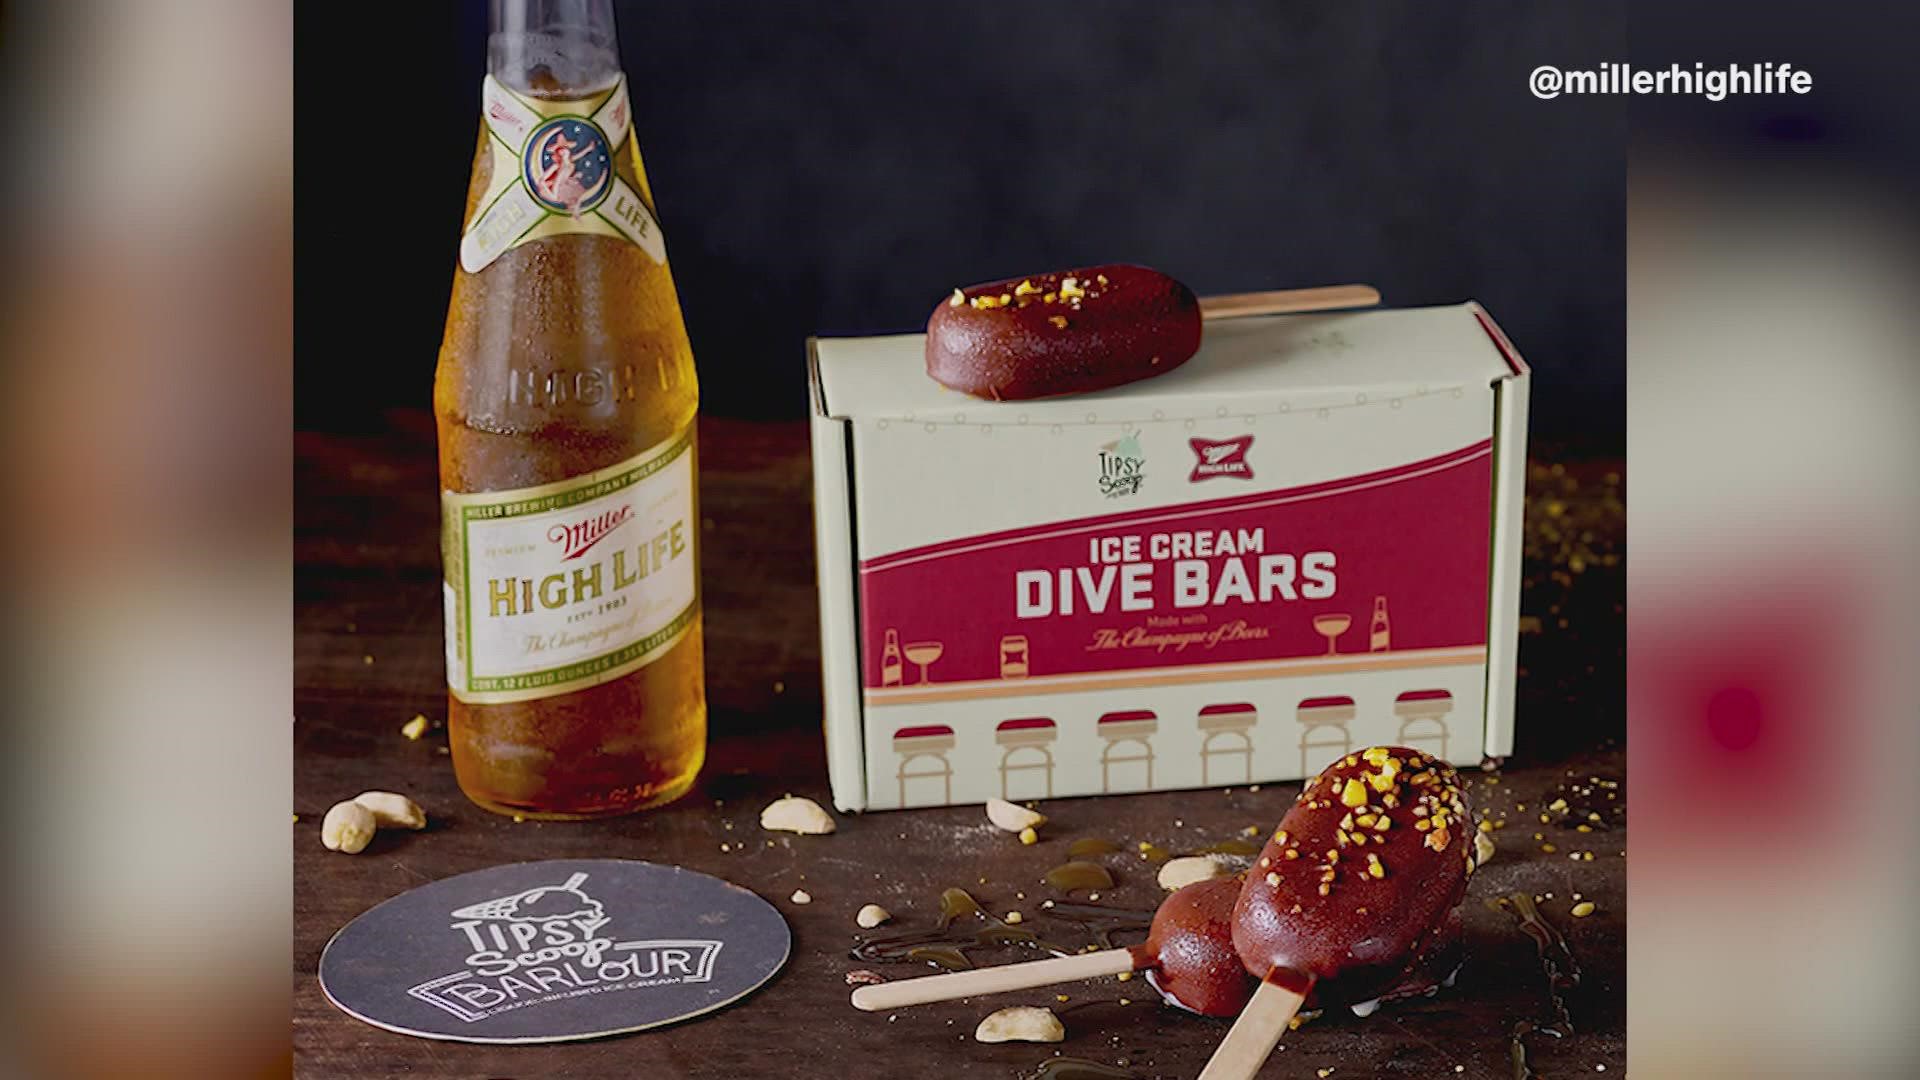 Miller High Life partnered with Tipsy Scoop to create the ice cream dive bar in honor of the 100th anniversary of the ice cream bar.